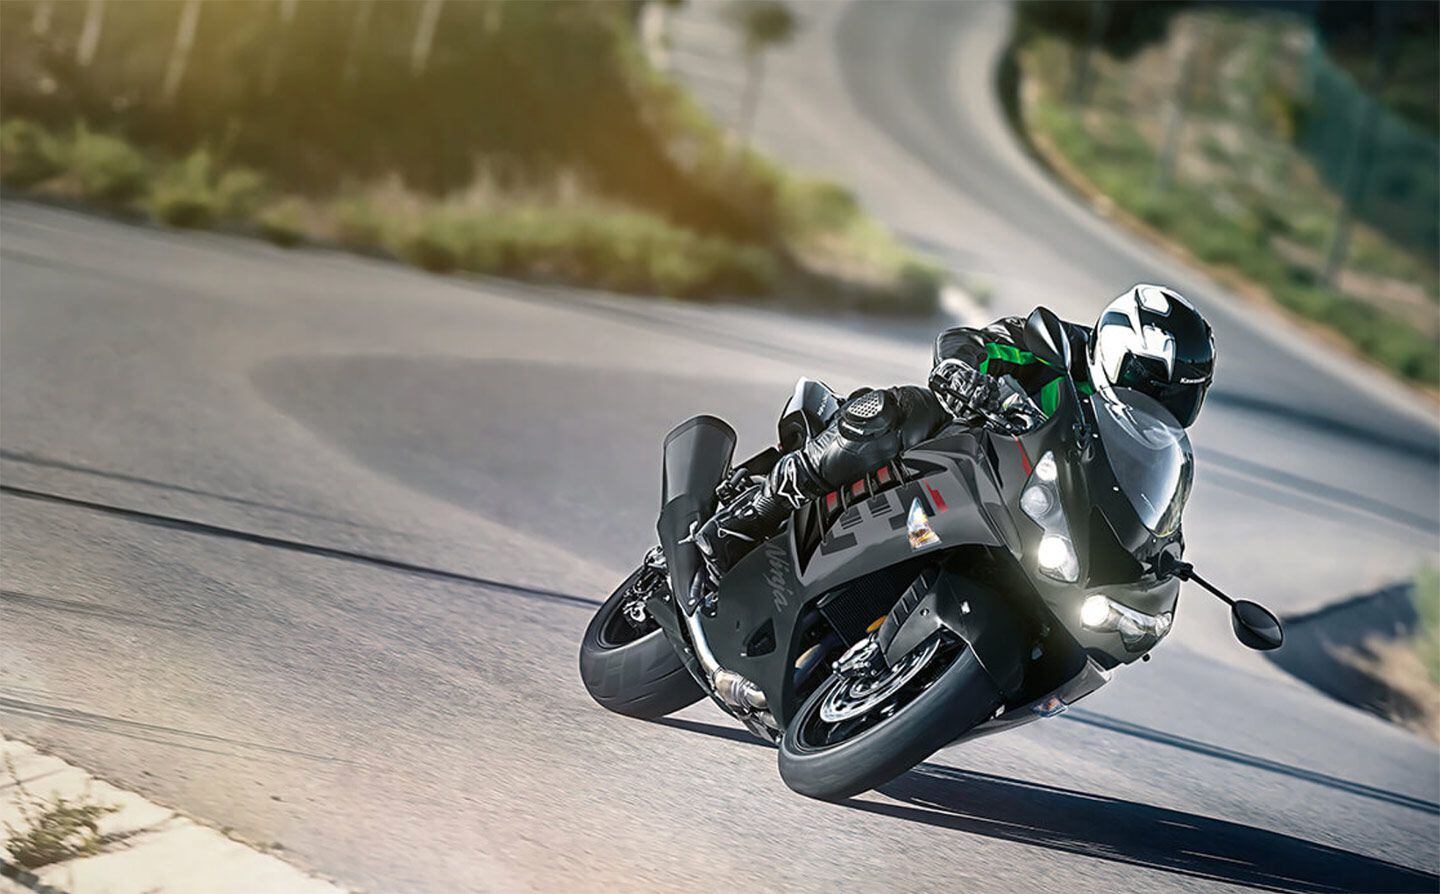 Power to weight, dollars to displacement. The Kawasaki ZX-14 does all right with the former but masters the latter.